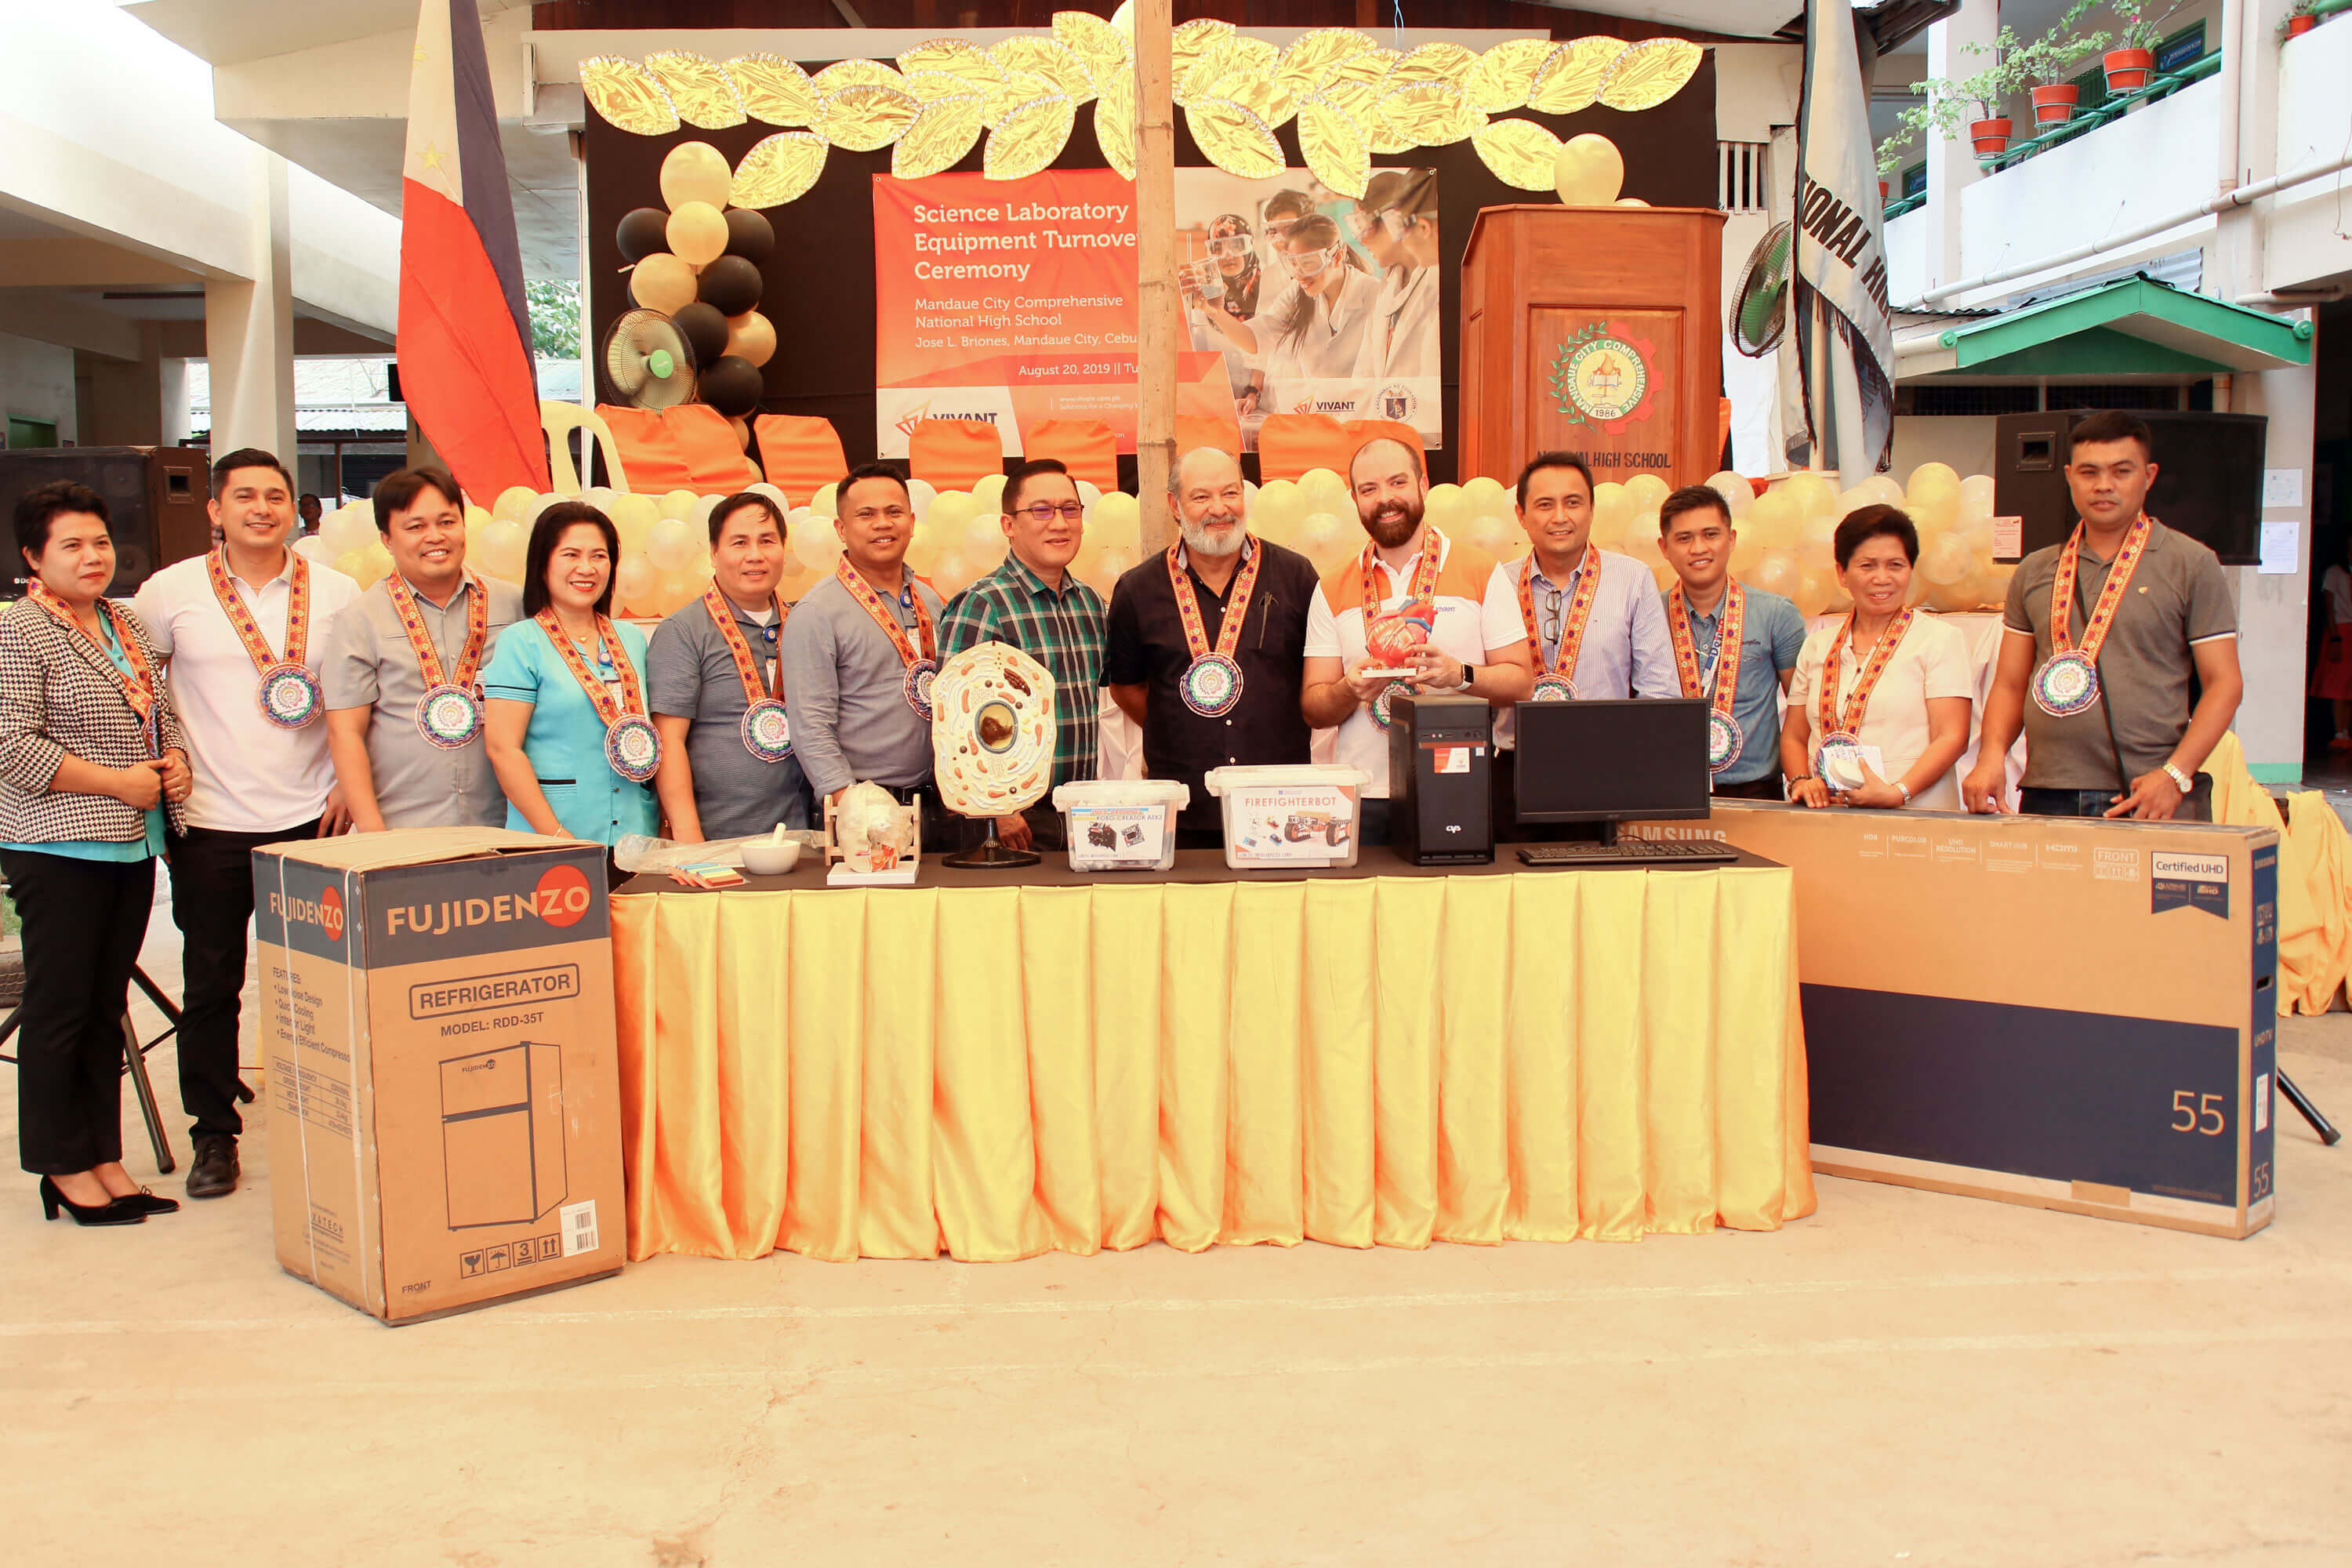 IN MANDAUE. Mandaue Mayor Jonas Cortes (center) vows to use his authority to promote education for the city’s youth and thanks Vivant Foundation, represented by its executive director Shem Garcia (5th from right), for donating various science and laboratory tools and equipment to the Mandaue City Comprehensive National High School. Also present at the turnover ceremony last Aug. 20 were MCCNHS principal Marilou Mabansag (2nd from right), Mandaue City Councilor Malcolm Sanchez (2nd from left), Department of Education officials, and Ramontito Garcia (6th from right) and lawyer Jess Garcia (4th from right), both of Vivant Corporation.